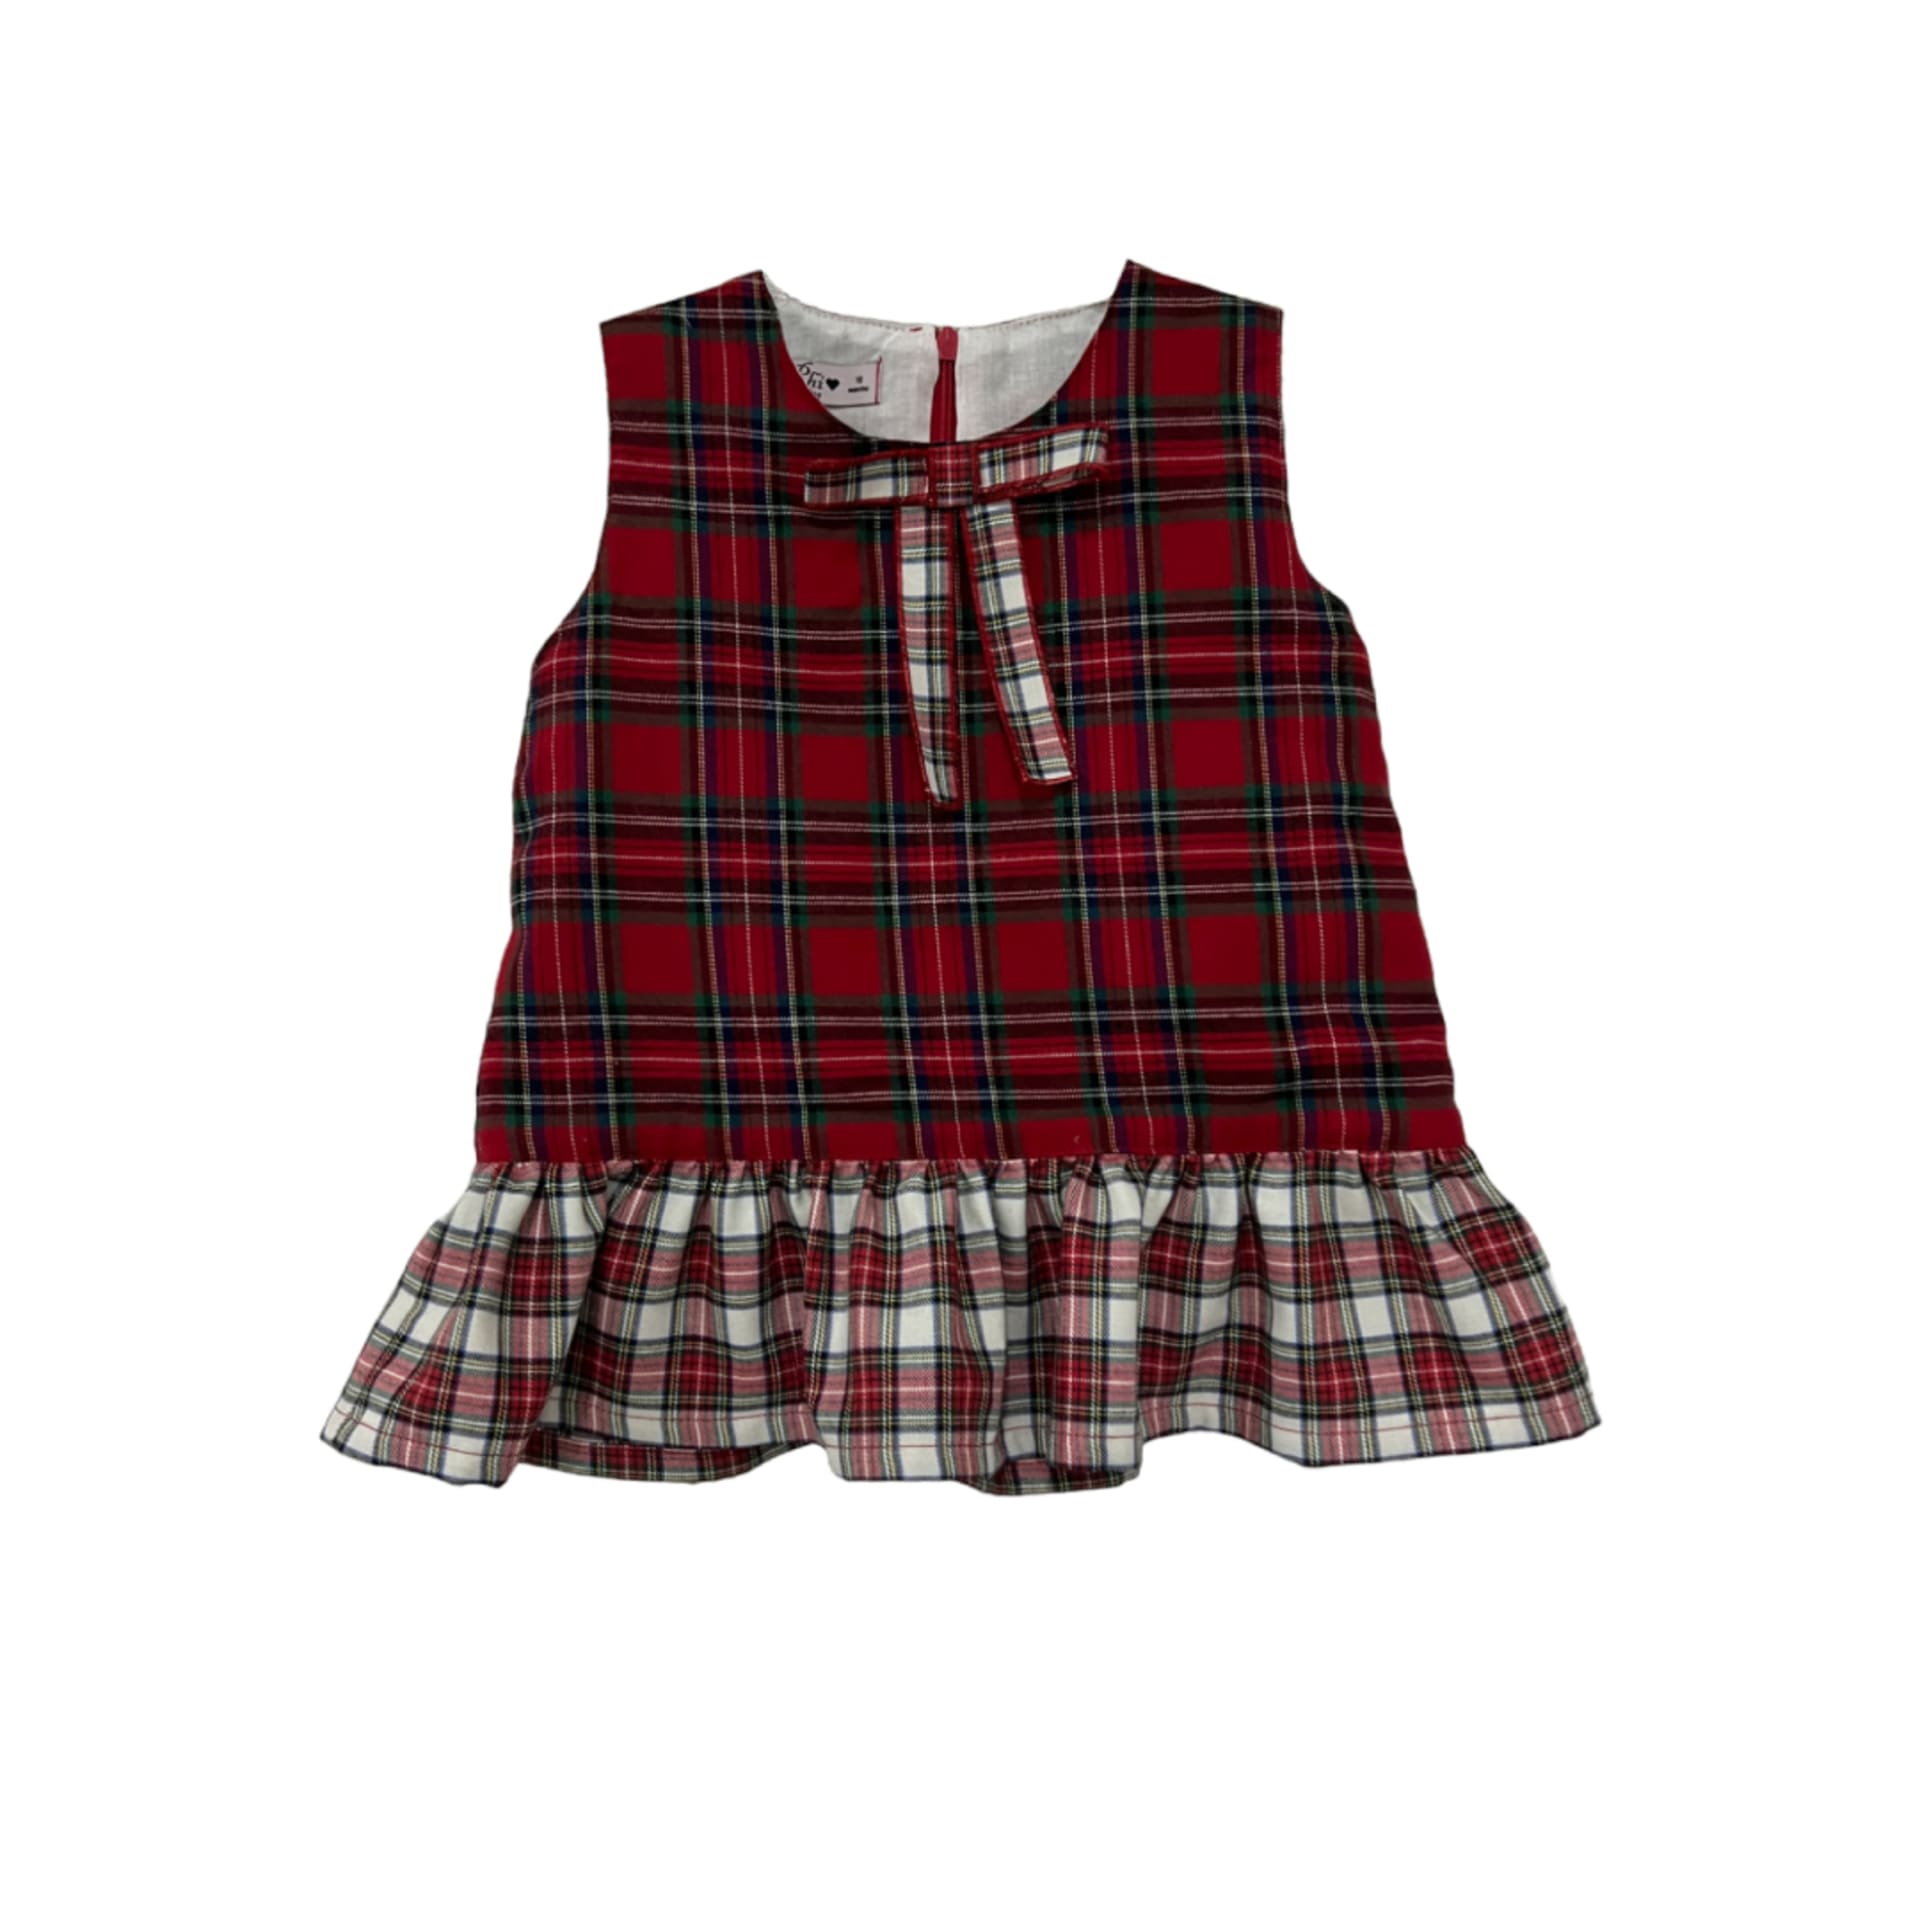 Red tartan and red and ivory tartan dress